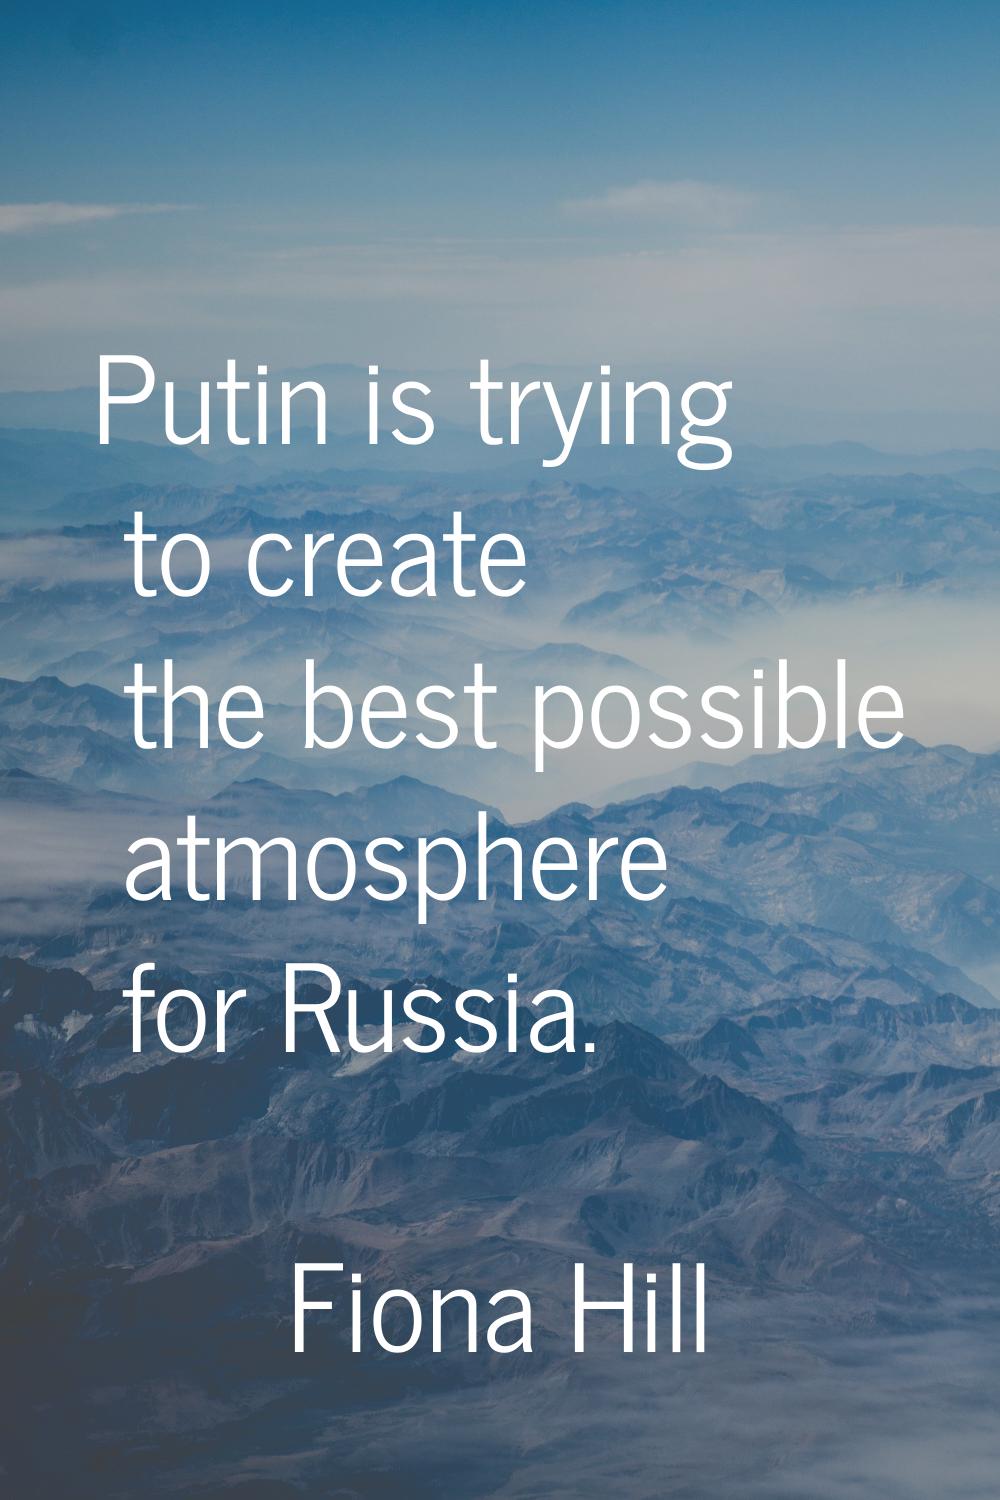 Putin is trying to create the best possible atmosphere for Russia.